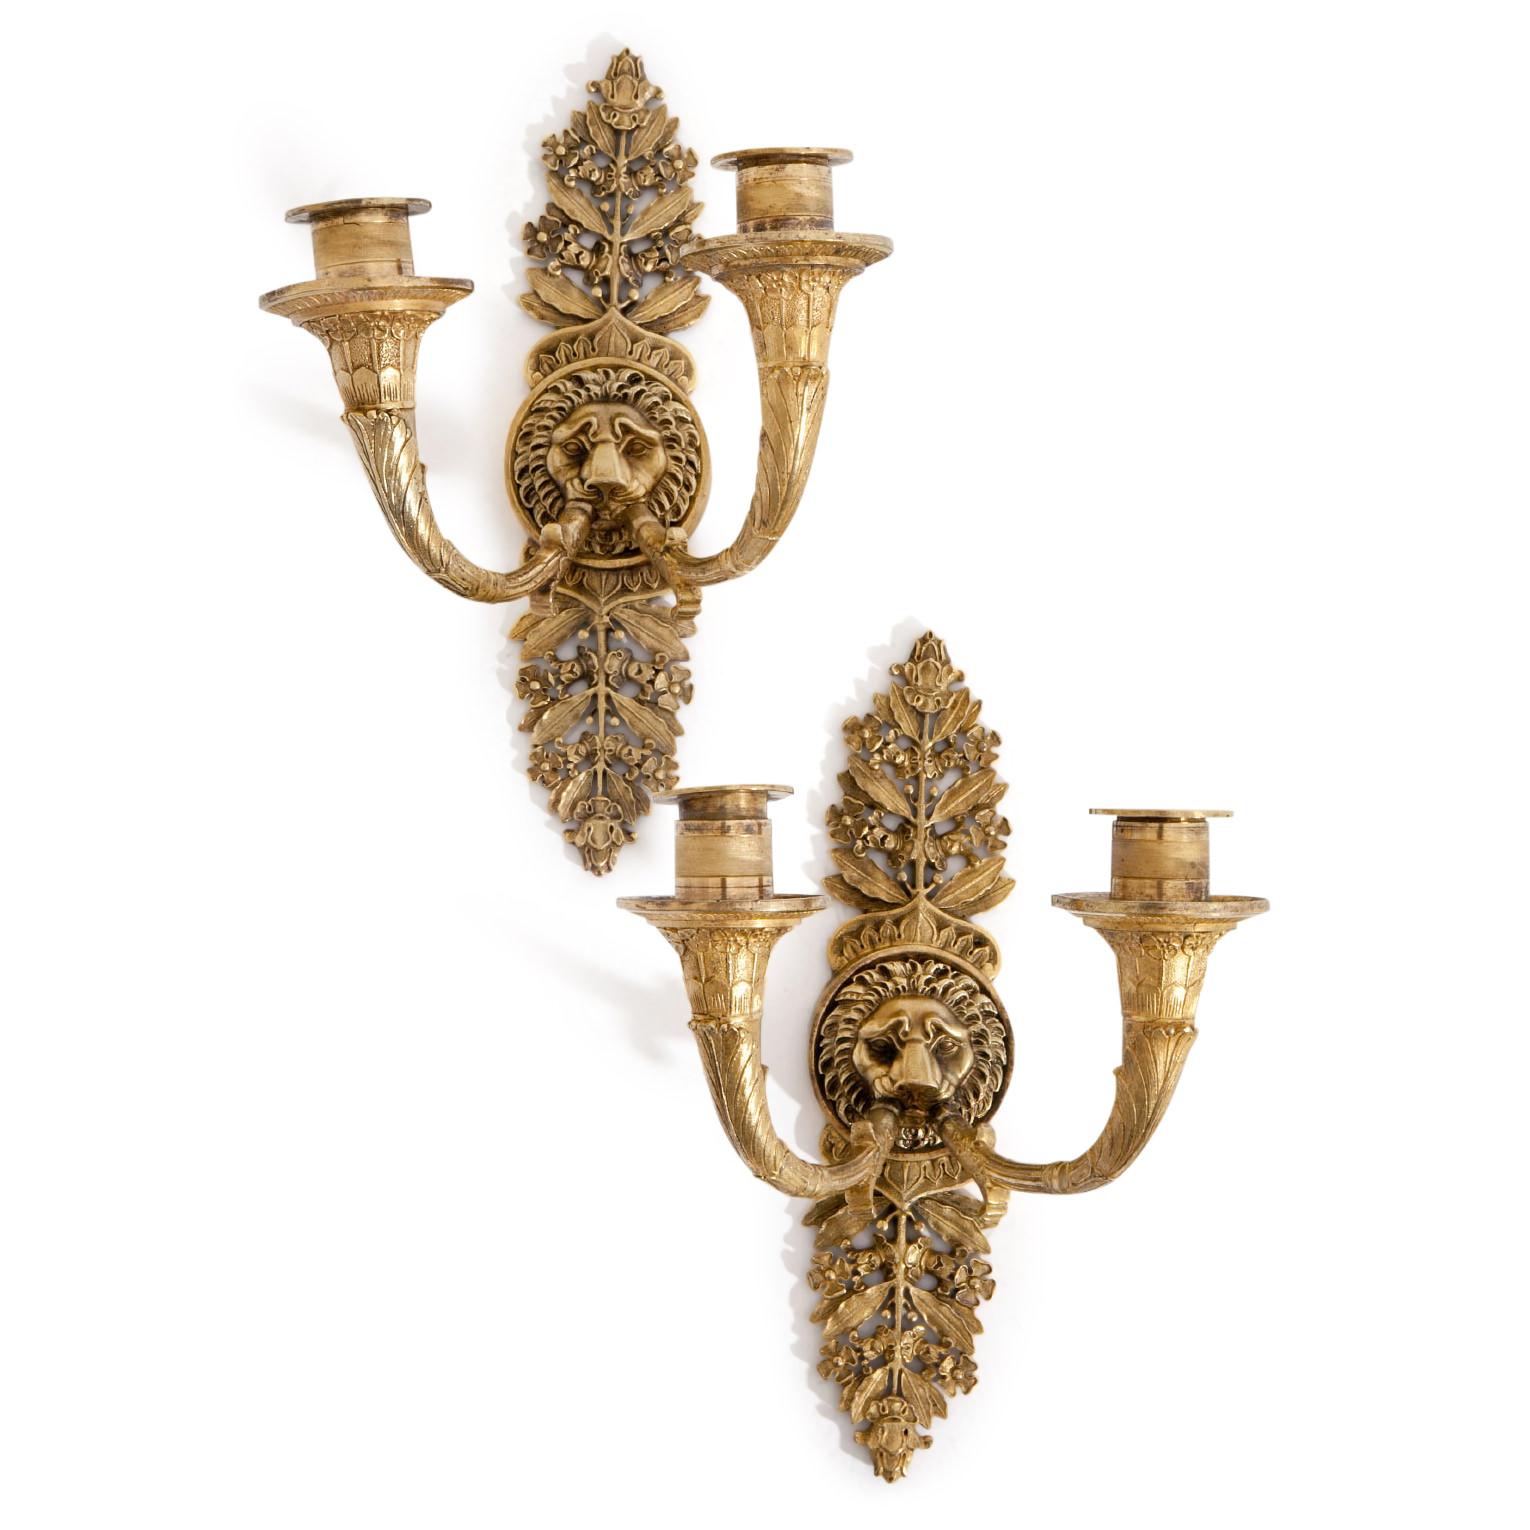 Early 19th Century Gilt-Bronze Wall Appliques, France